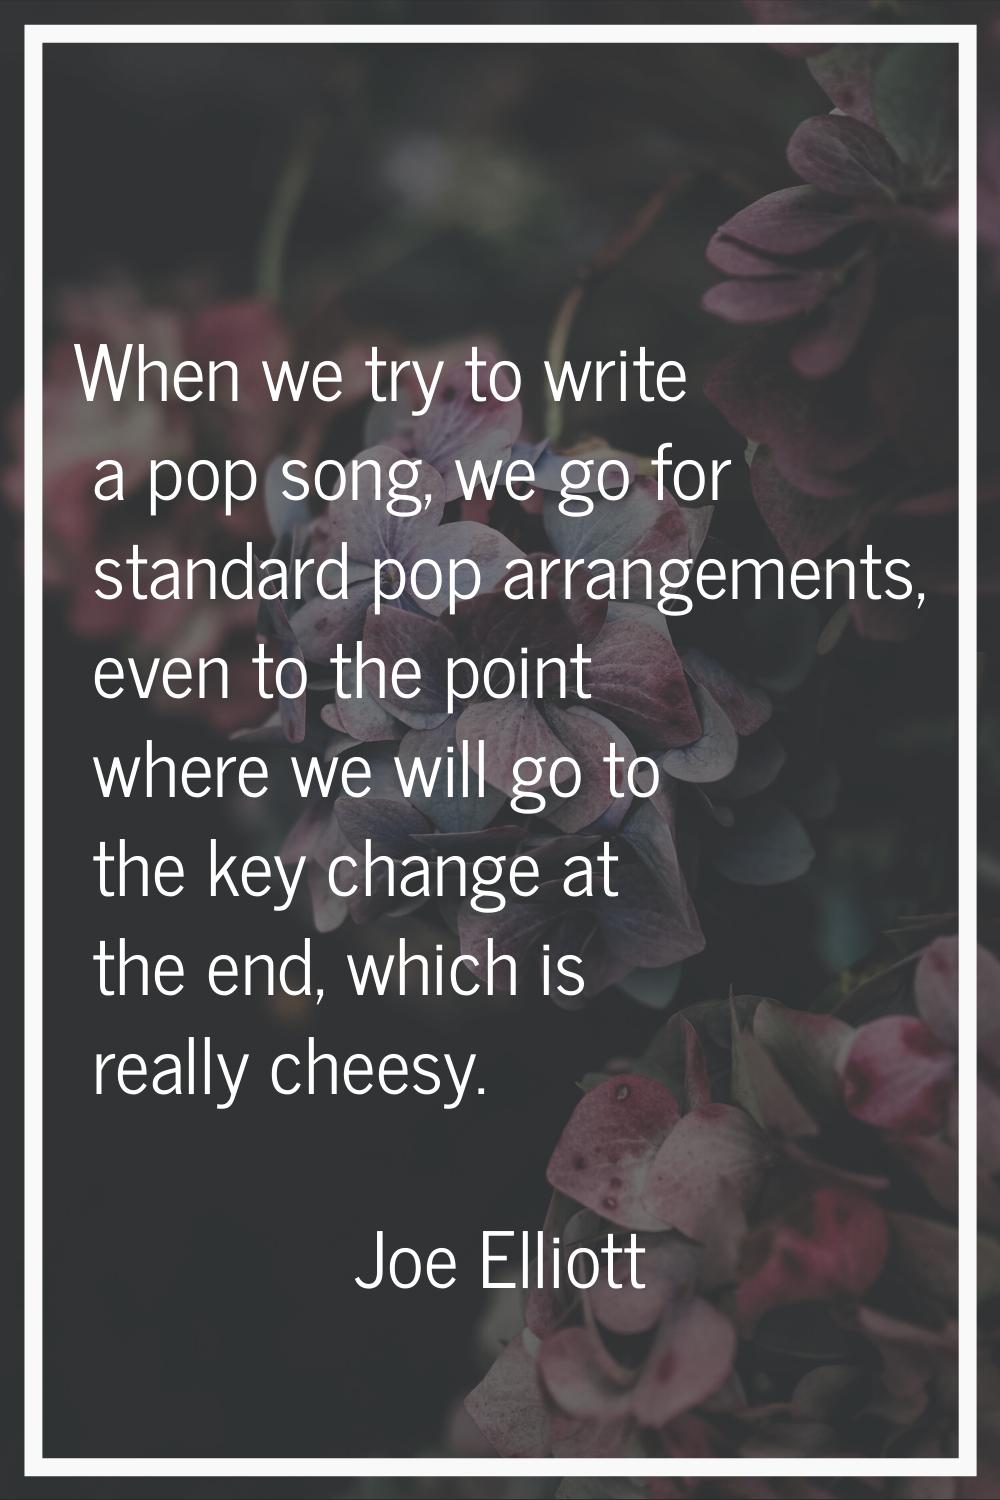 When we try to write a pop song, we go for standard pop arrangements, even to the point where we wi